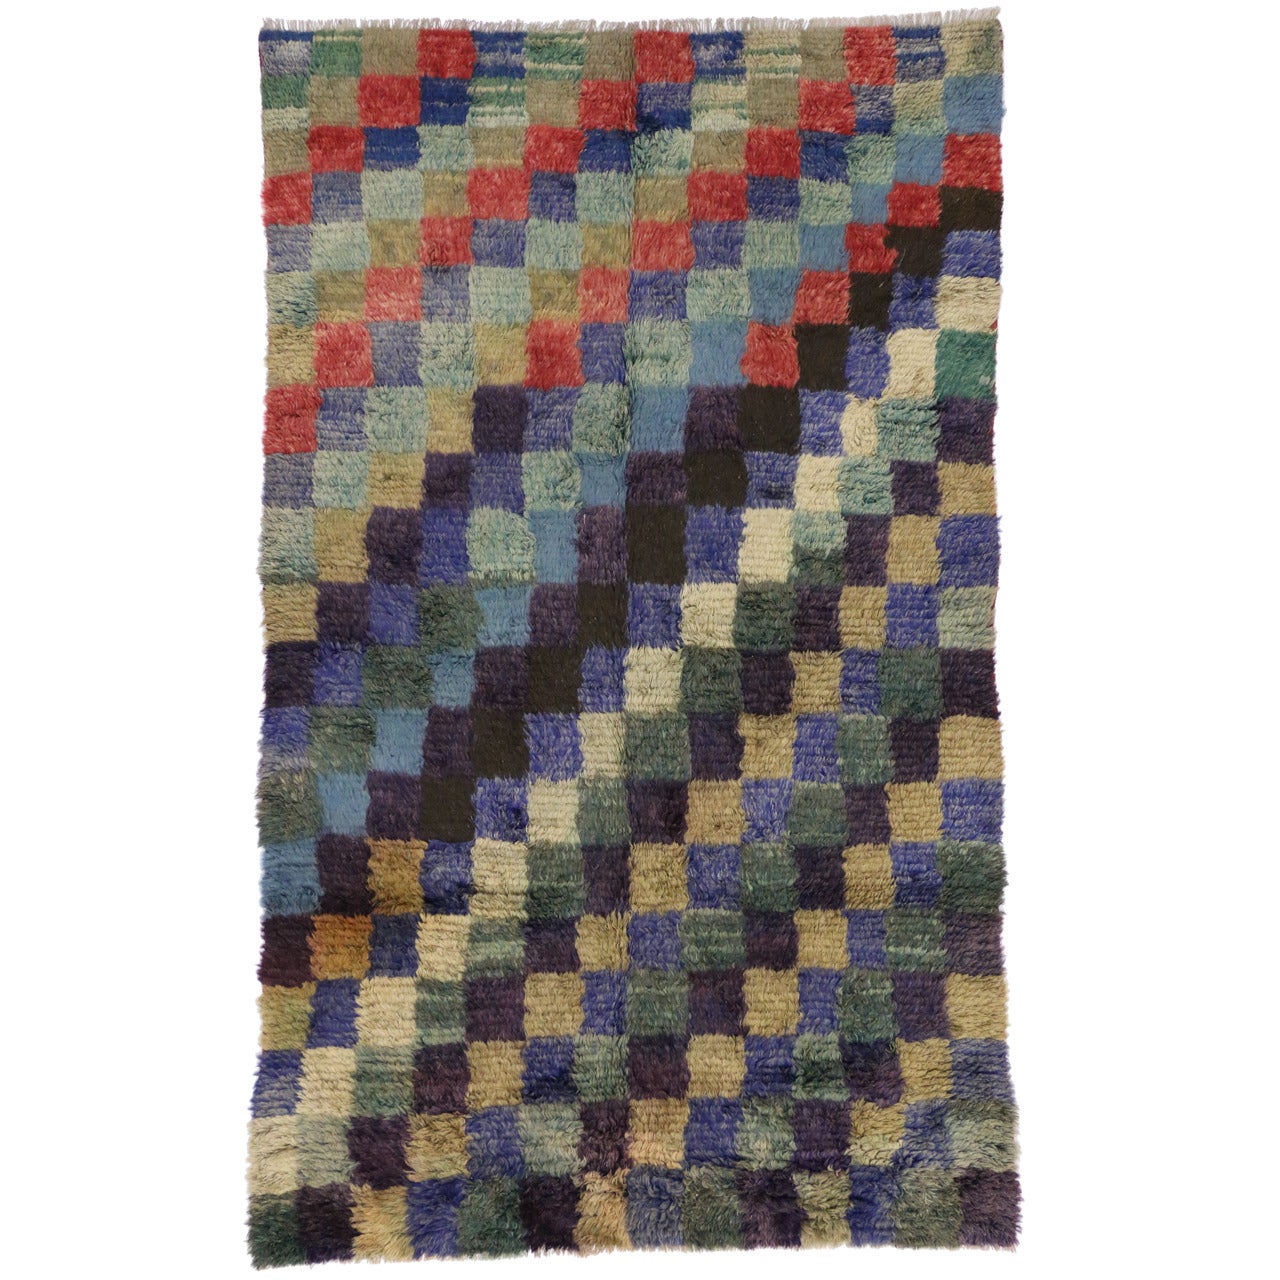 Vintage Turkish Tulu Rug with Checkered Pattern and Bauhaus Cubism Style